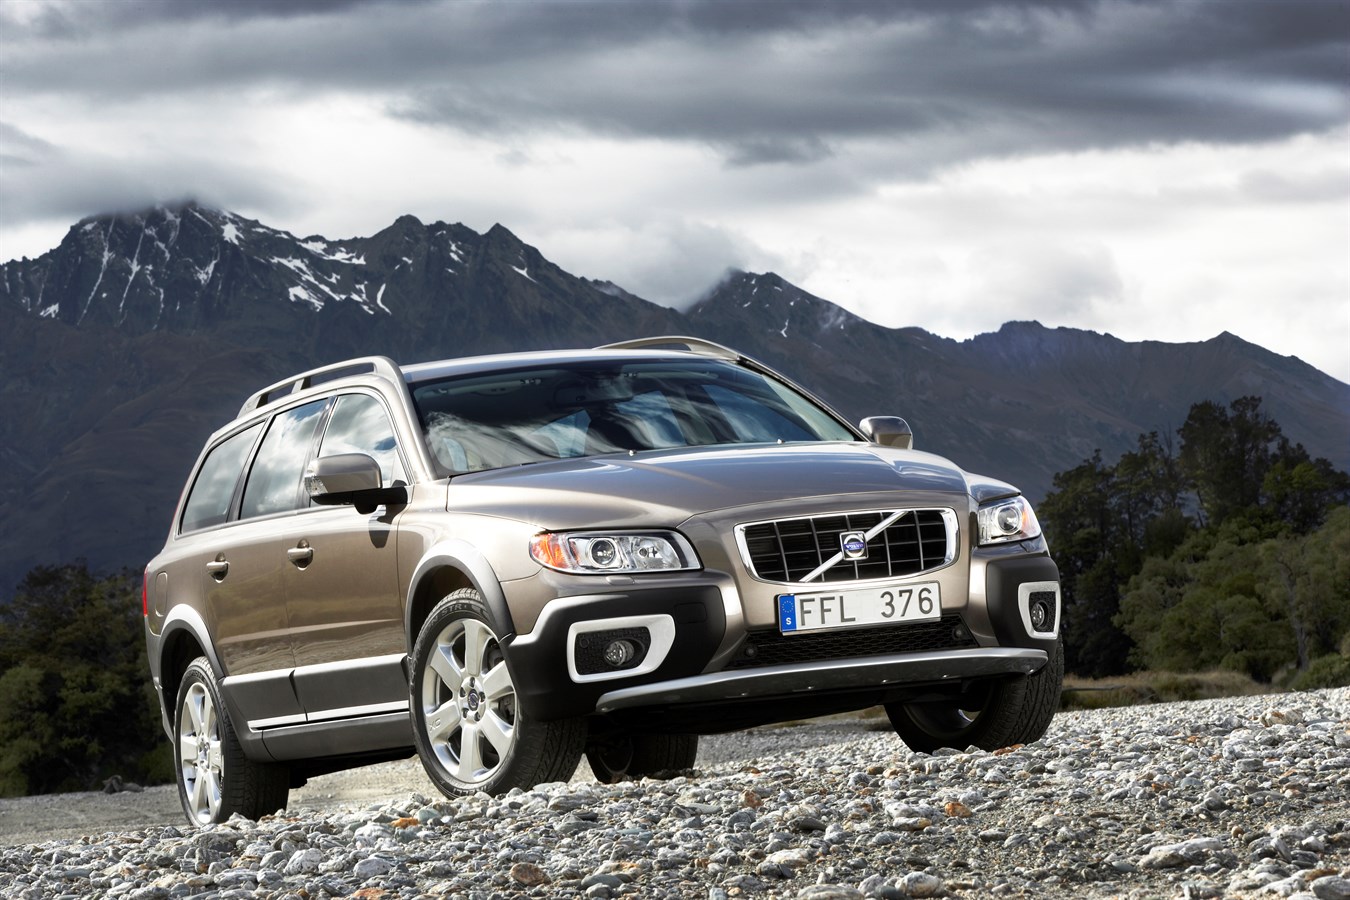 The all-new Volvo XC70 on display at ispo Sport & Style - Volvo Cars Global  Media Newsroom